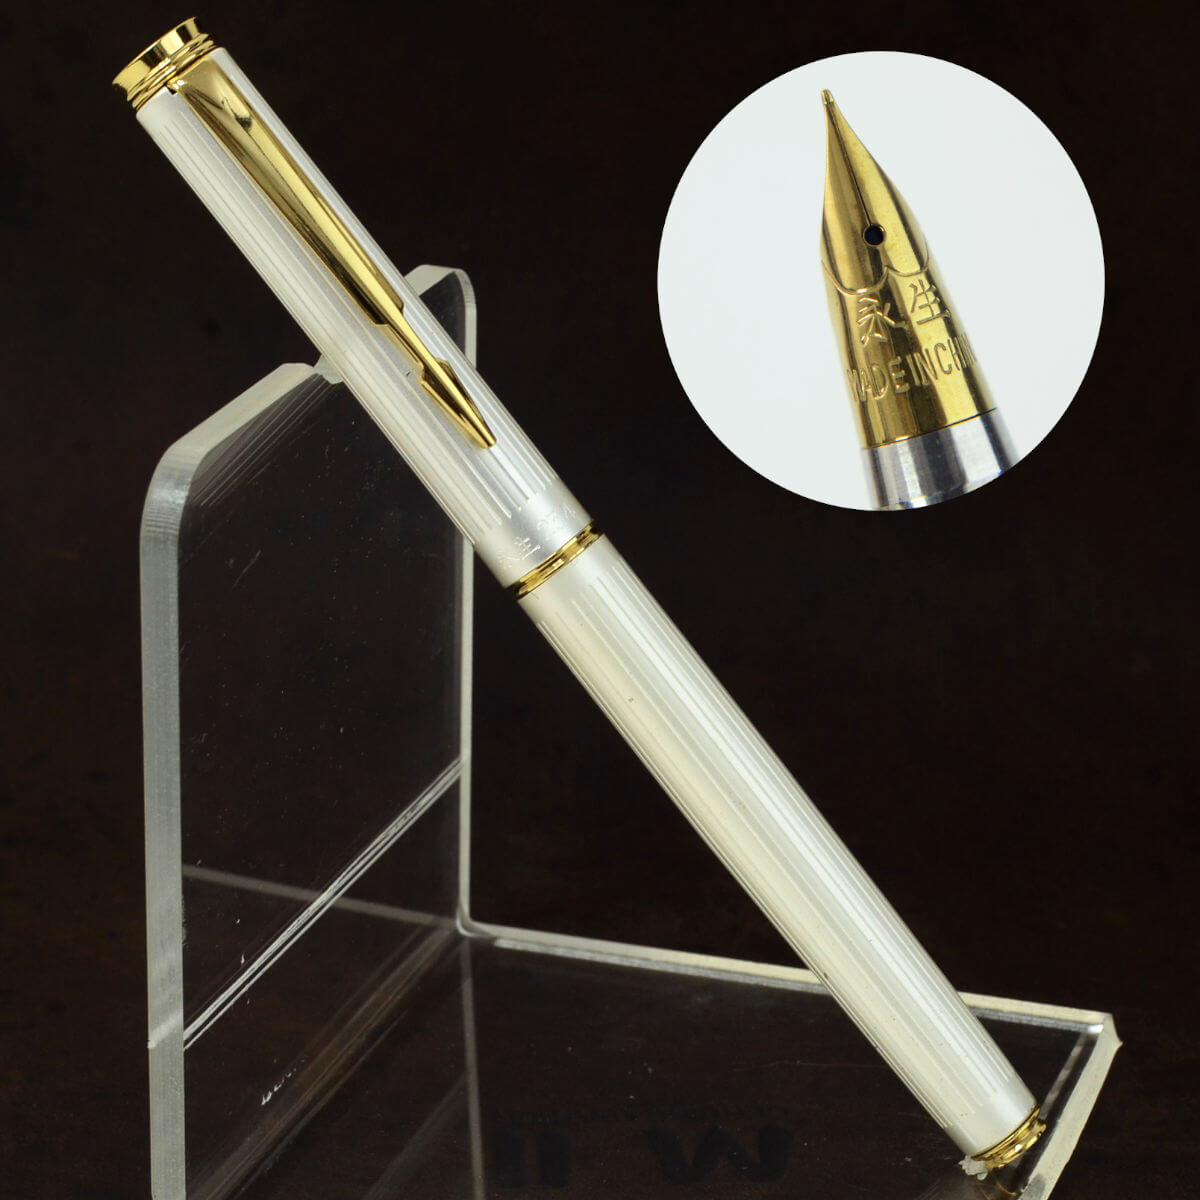 wingsung Ivory fluted fountain pen with triumph F nib – NOS